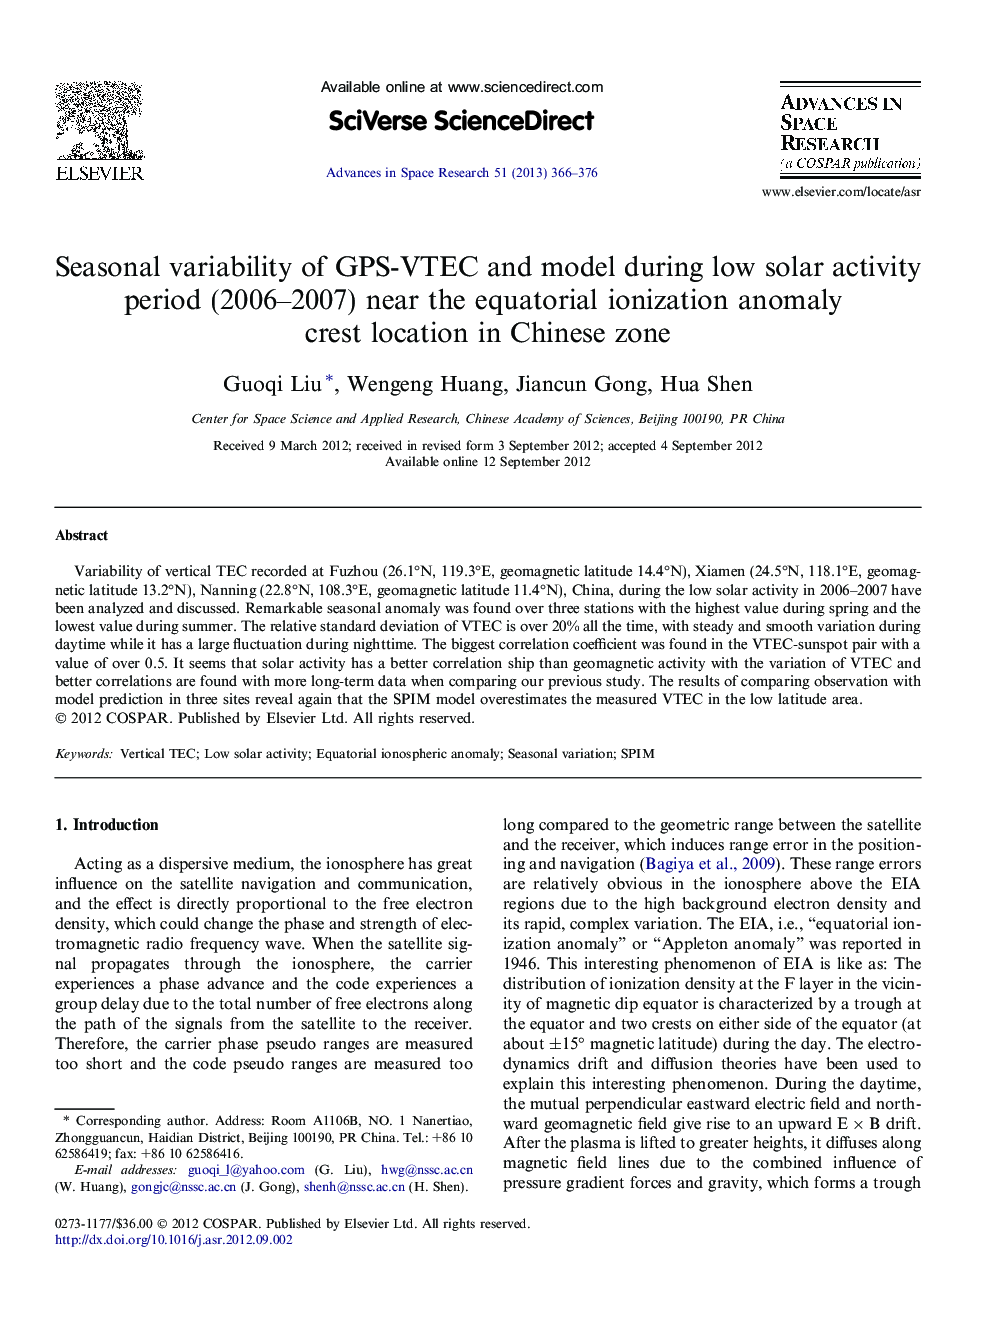 Seasonal variability of GPS-VTEC and model during low solar activity period (2006–2007) near the equatorial ionization anomaly crest location in Chinese zone